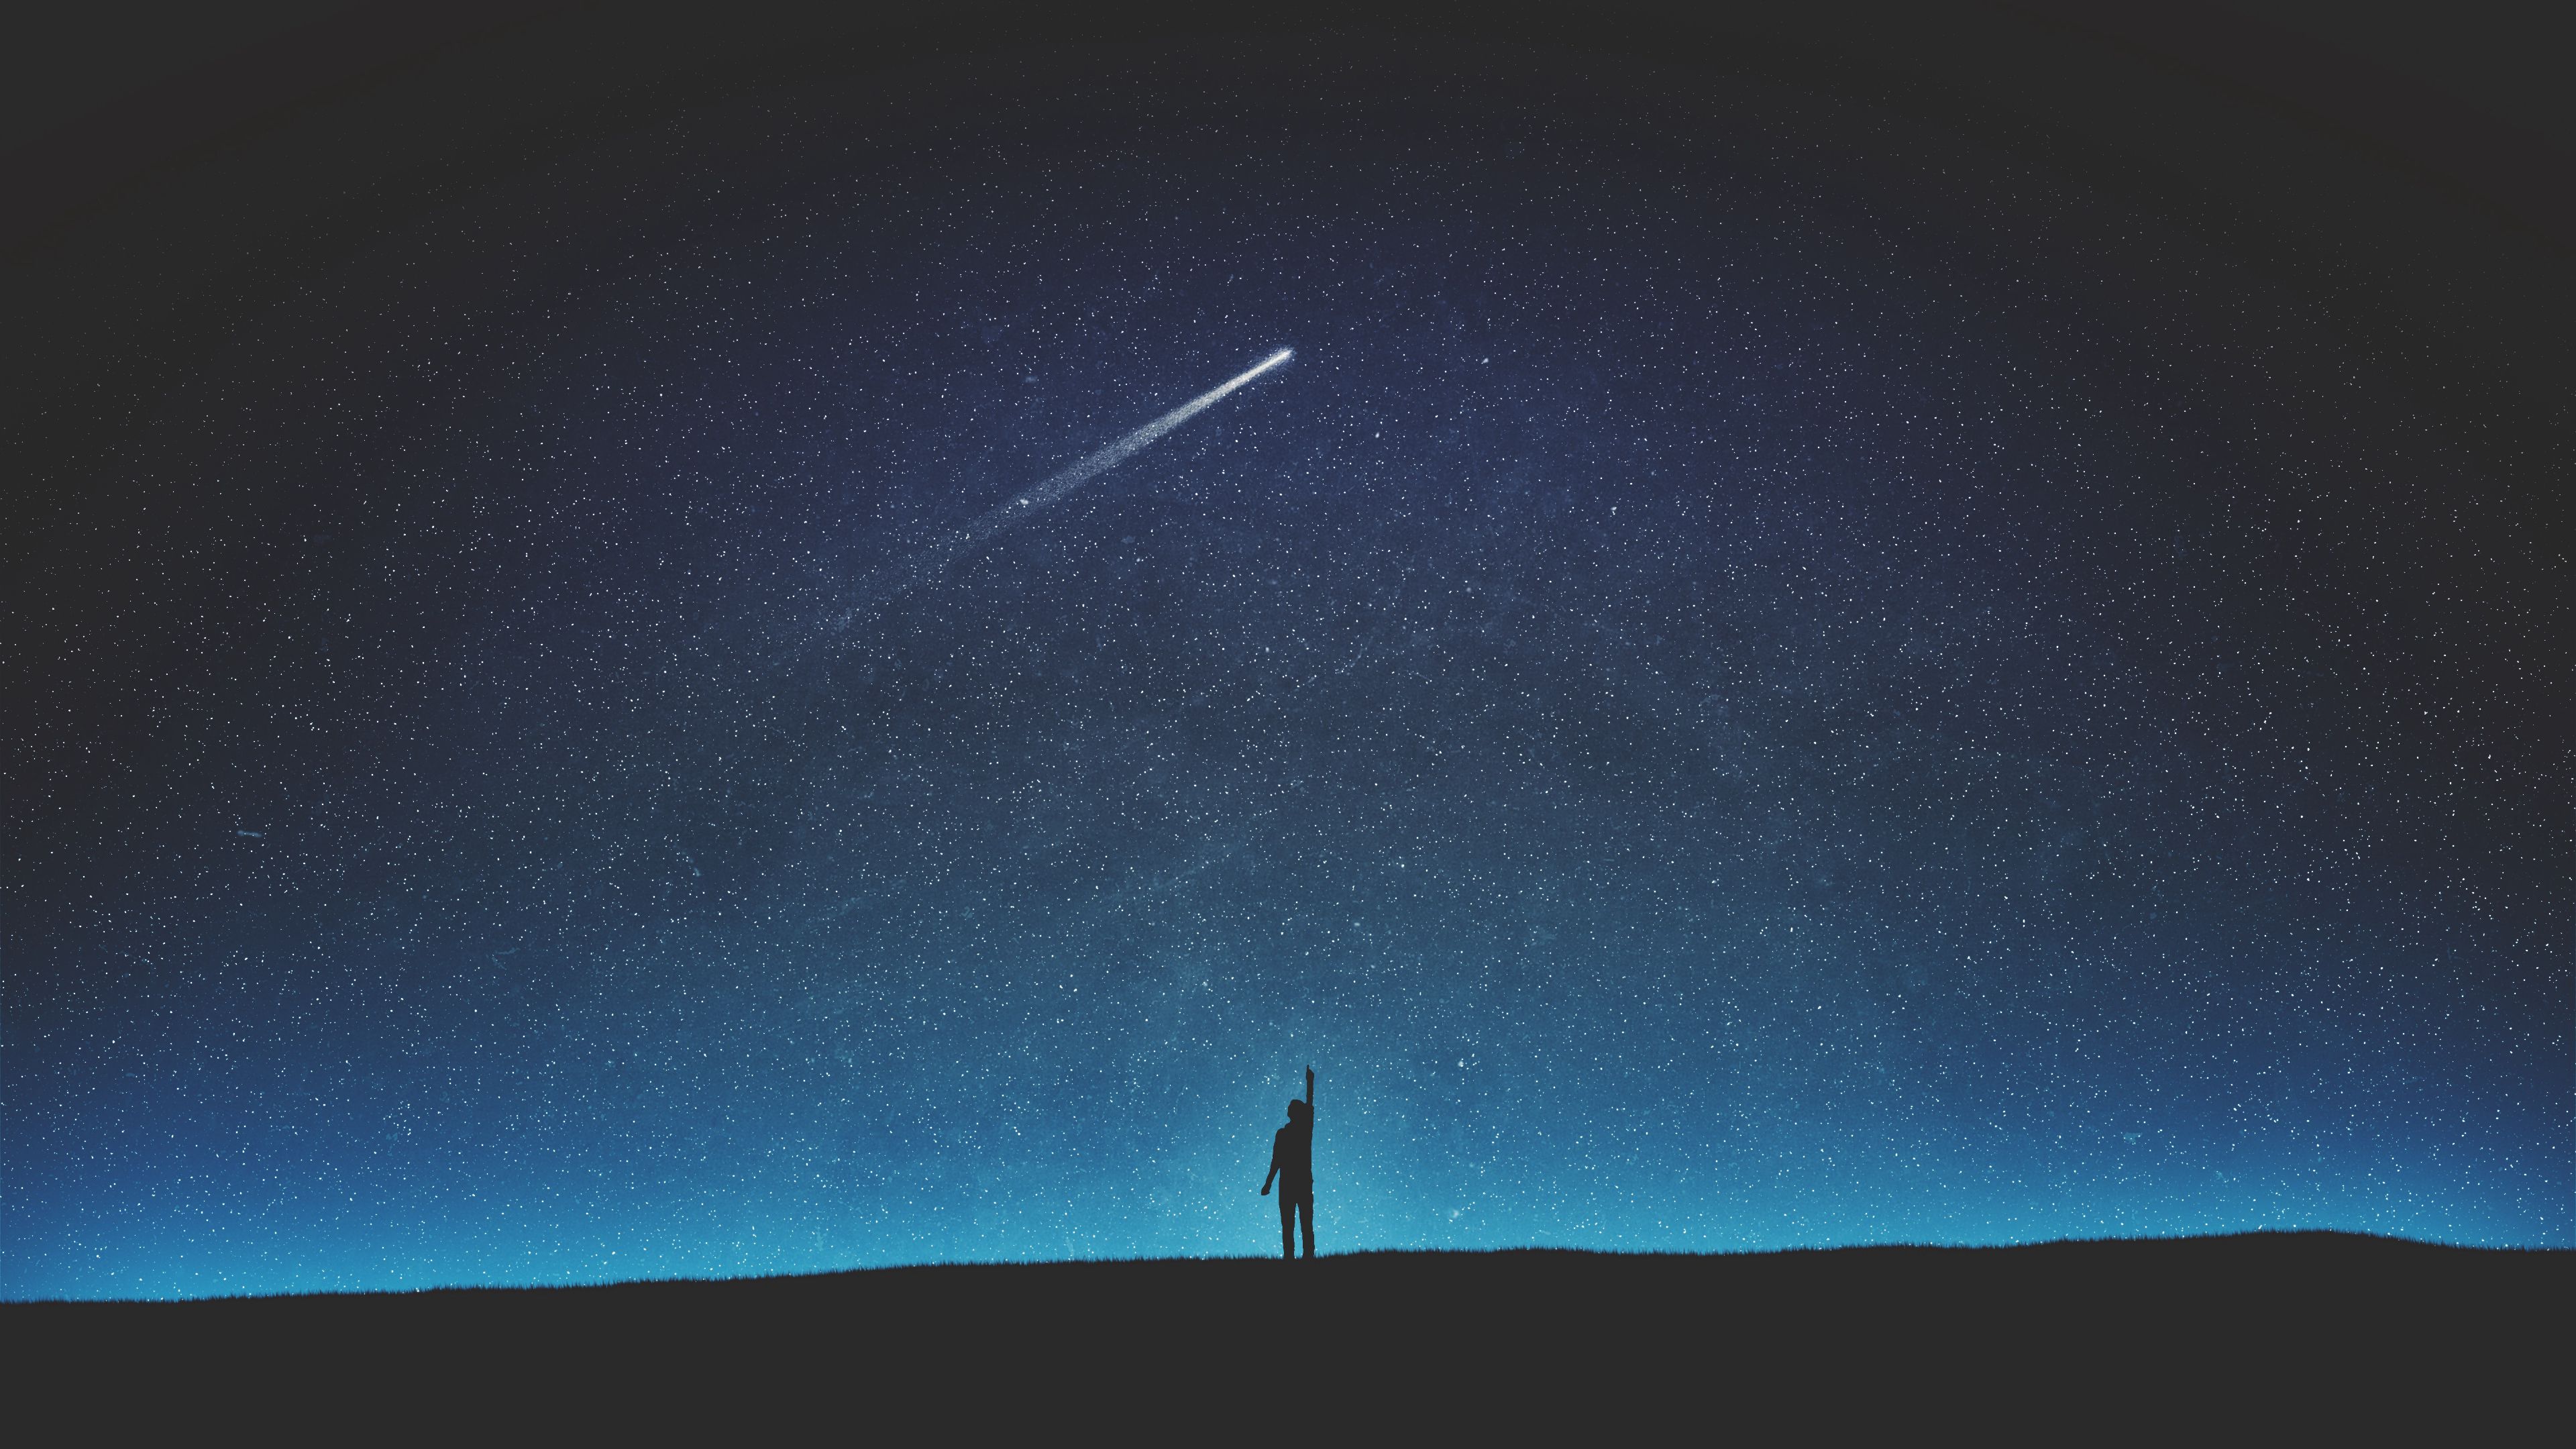 70164 download wallpaper starry sky, night, art, silhouette, minimalism, shooting star screensavers and pictures for free